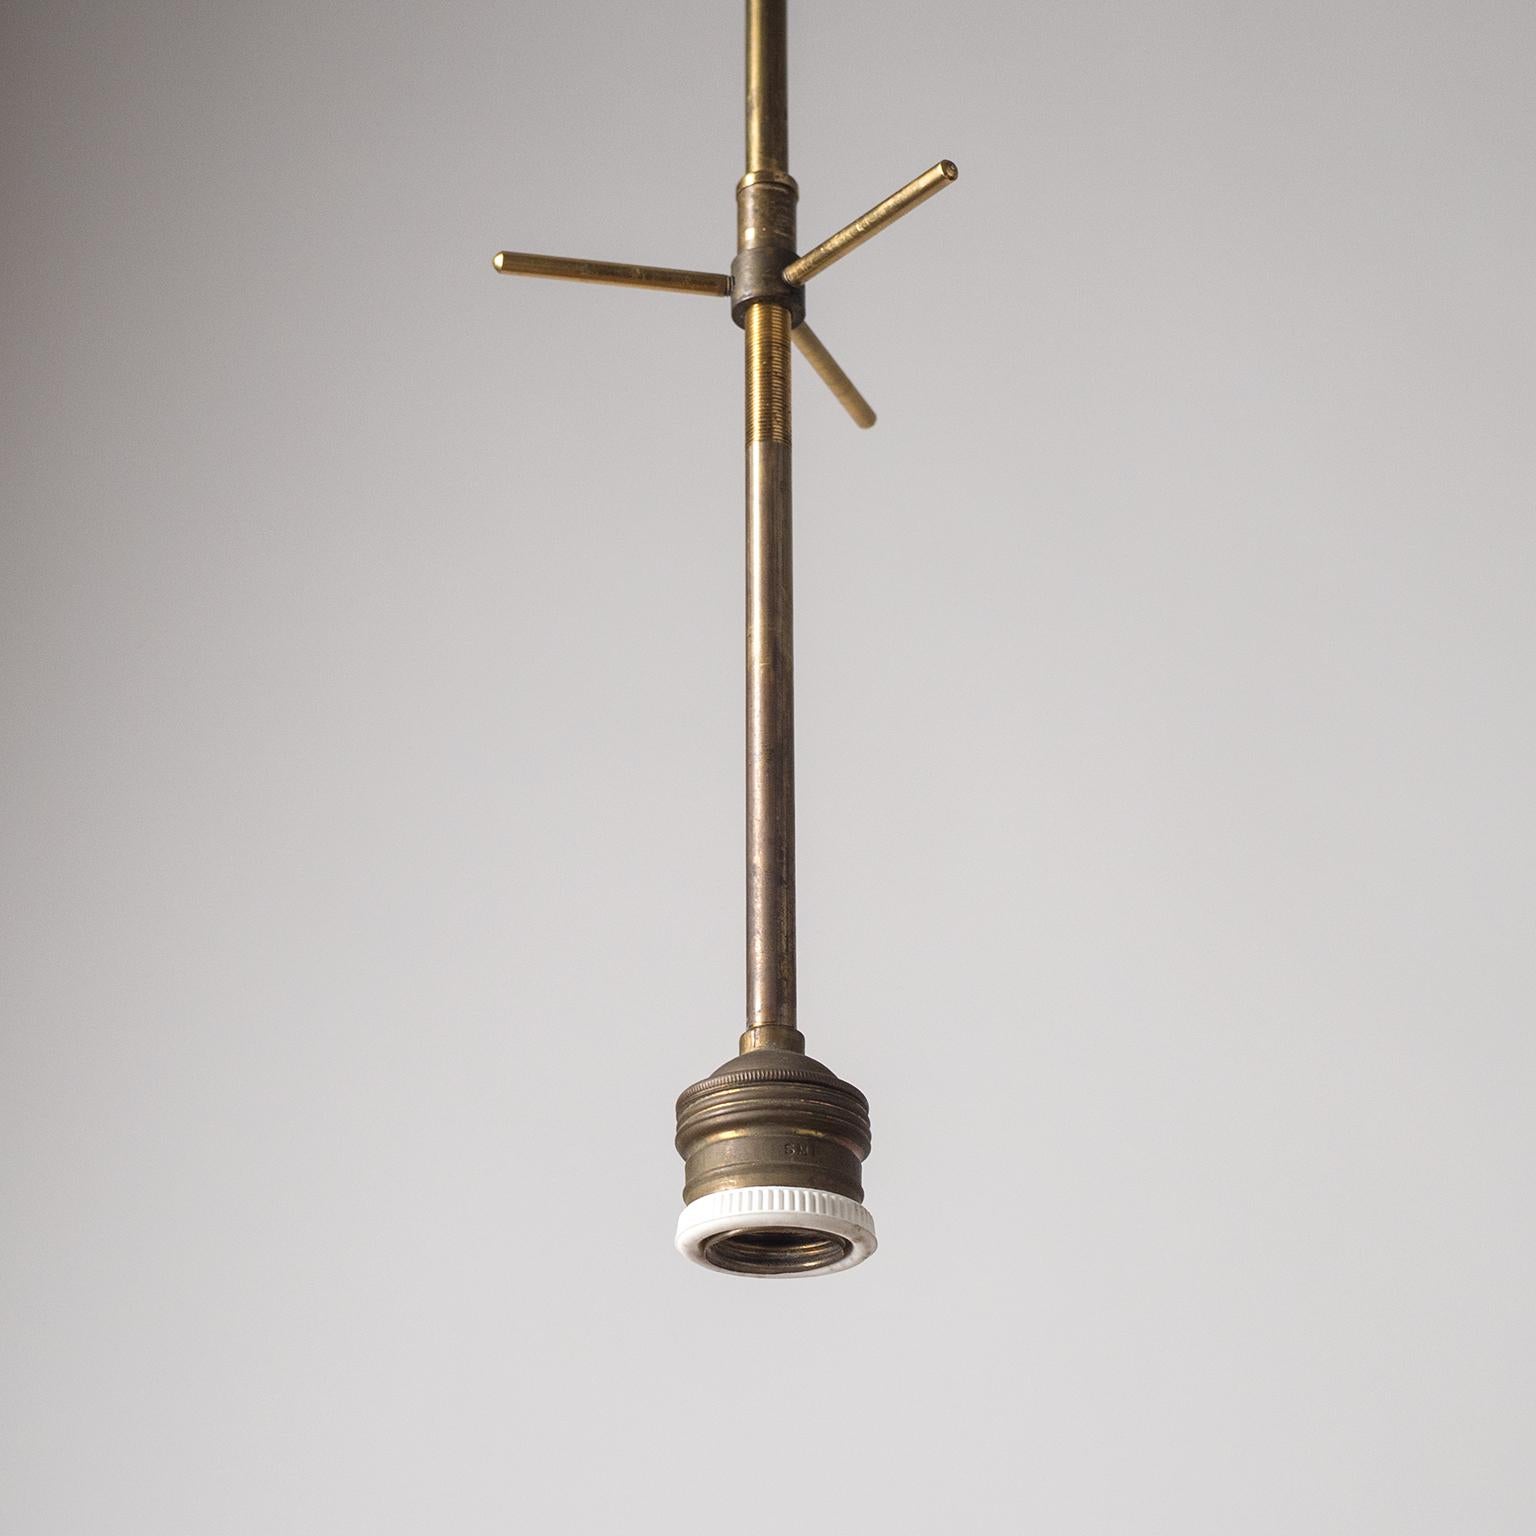 Lacquered Tall Vistosi Ceiling Light, 1960s For Sale